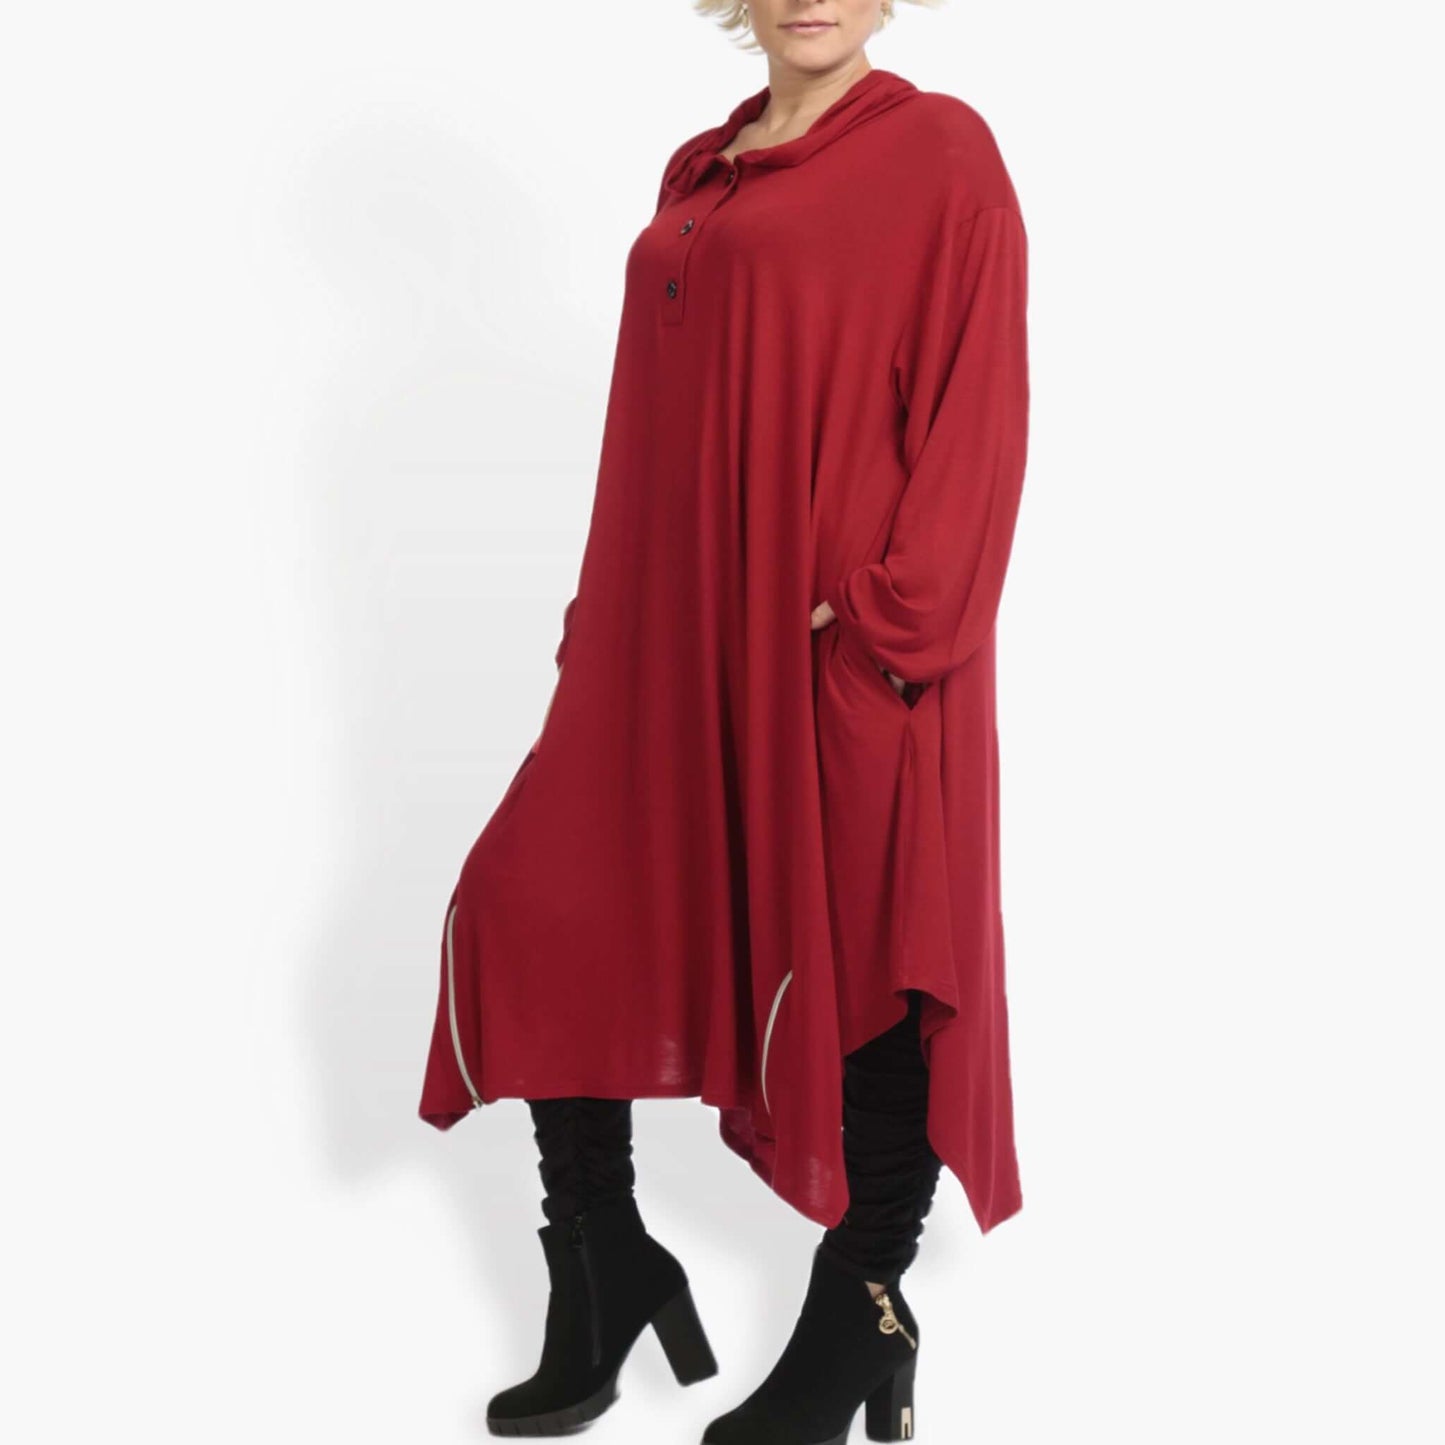 Everyday dress in A-shape made of fine jersey quality, viscose basics in red